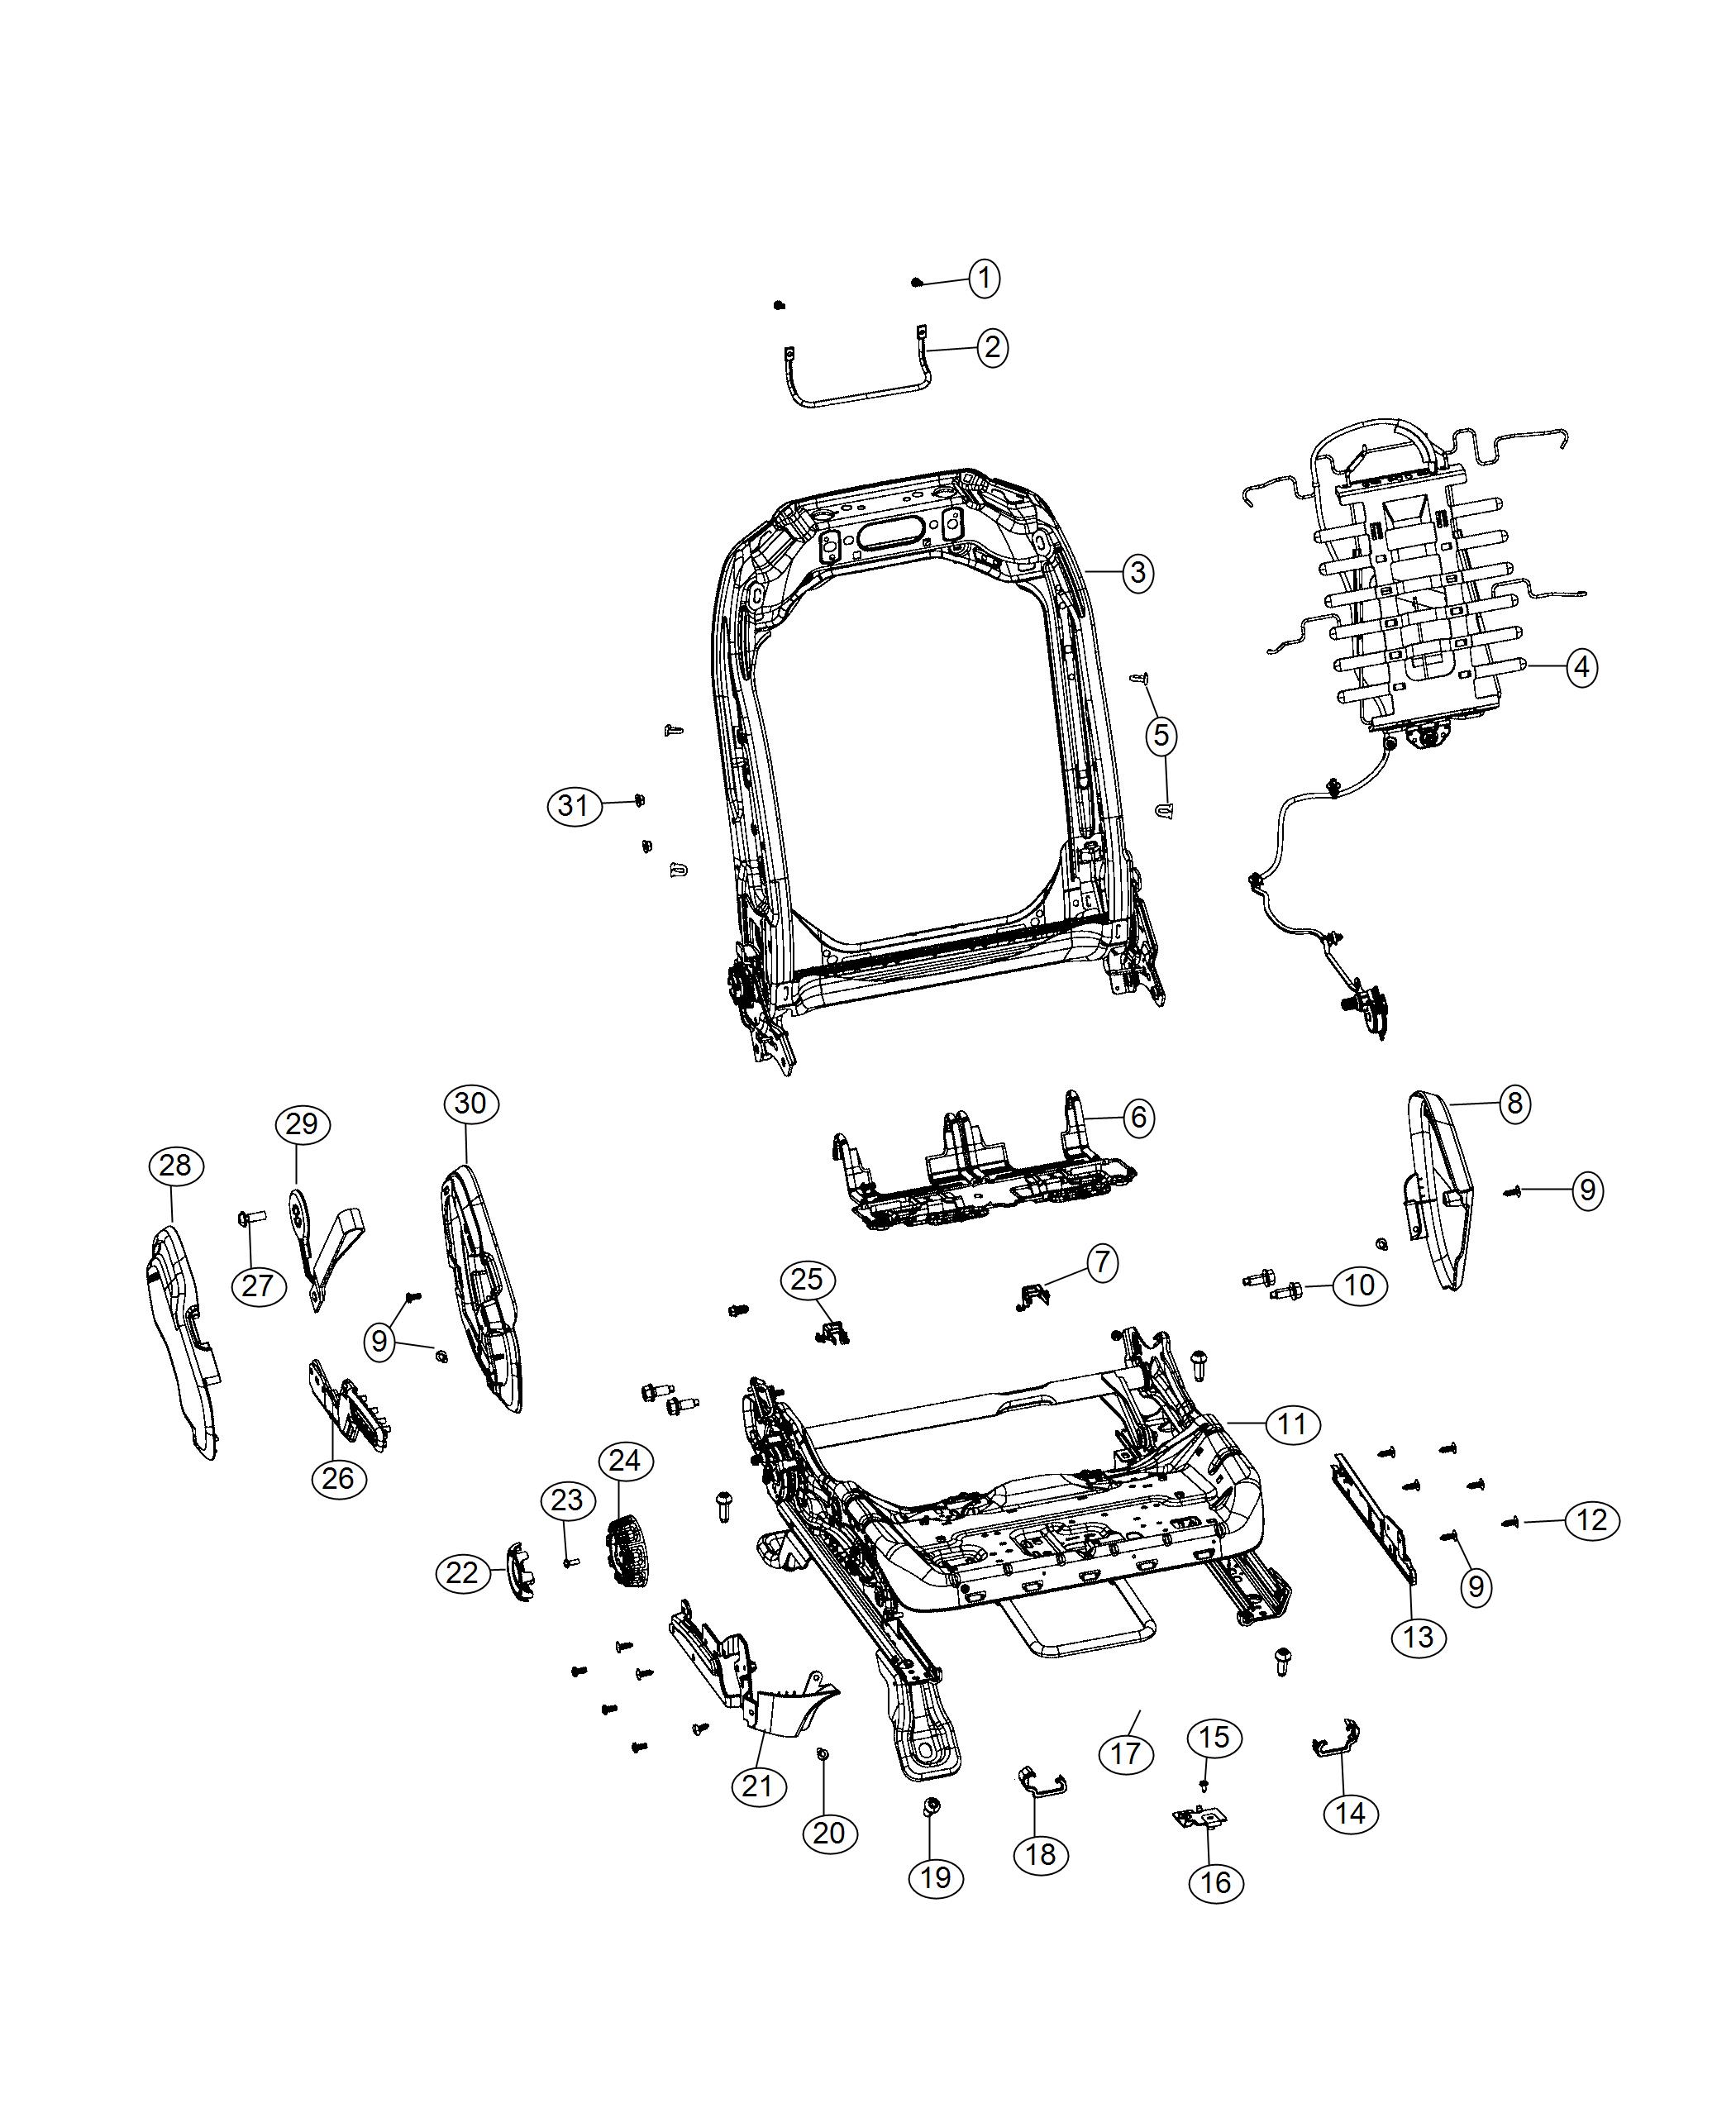 Adjusters, Recliners, Shields and Risers - Driver Seat - 74 Body. Diagram